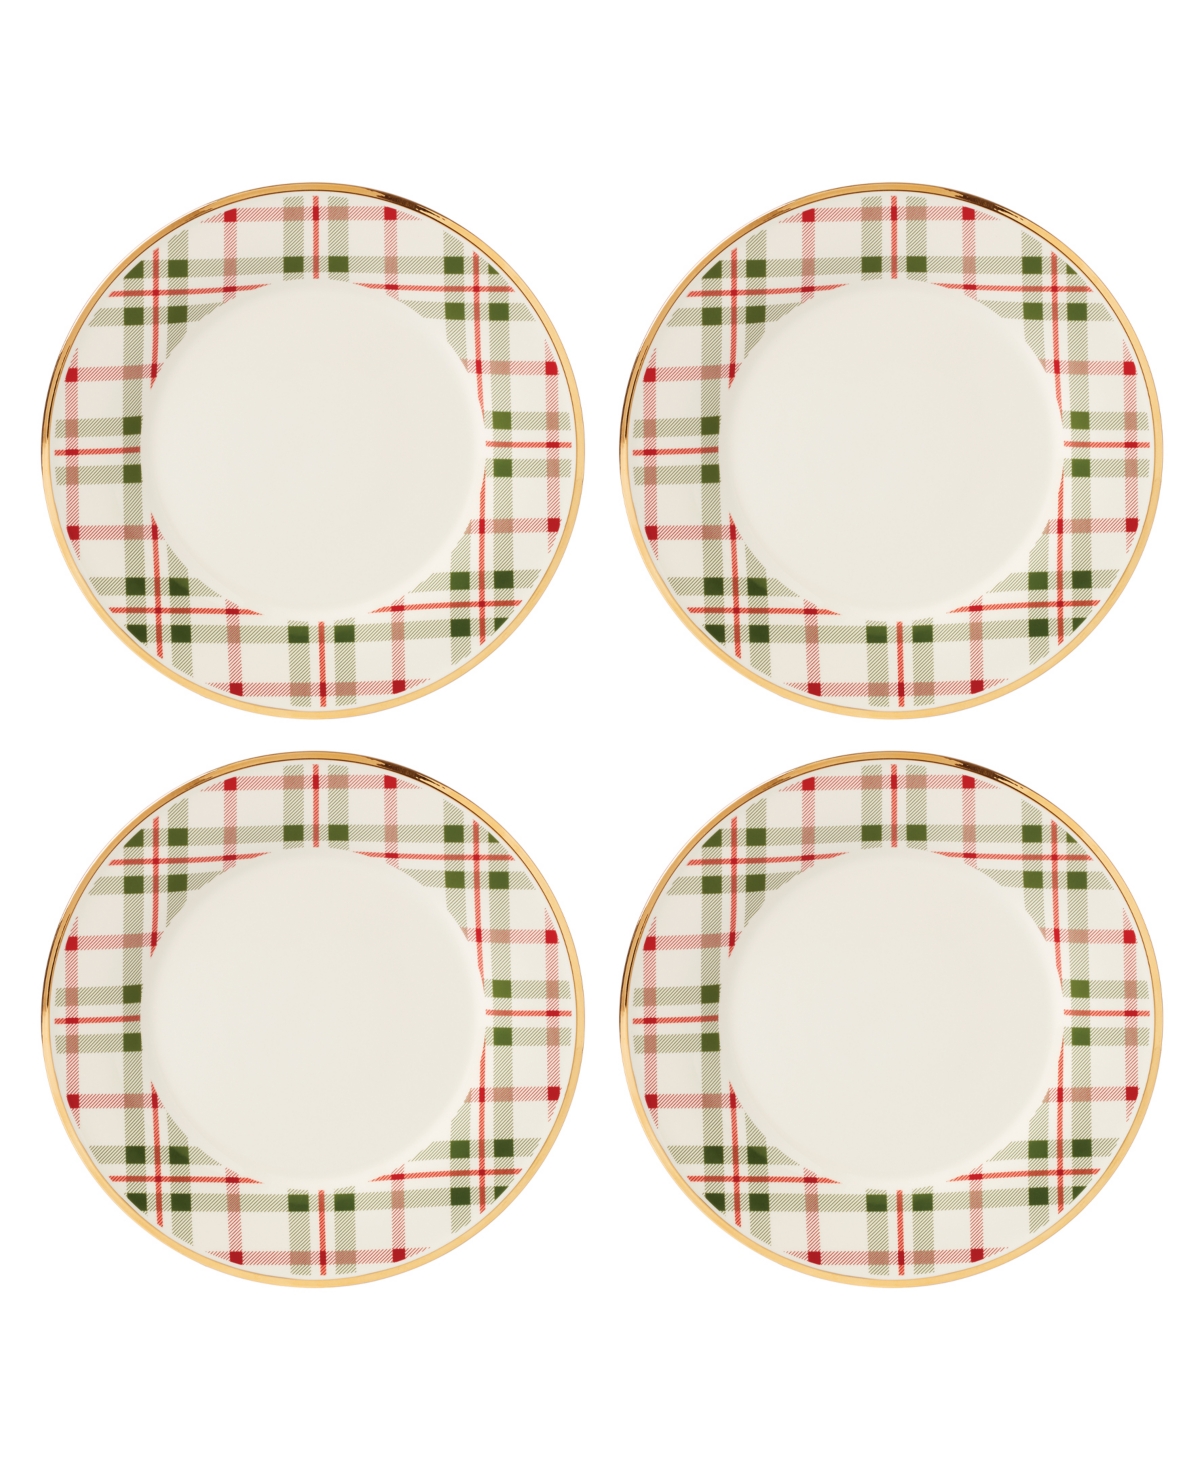 Holiday Plaid Porcelain Dinner Plates, Set Of 4 - Red  Green And Ivory